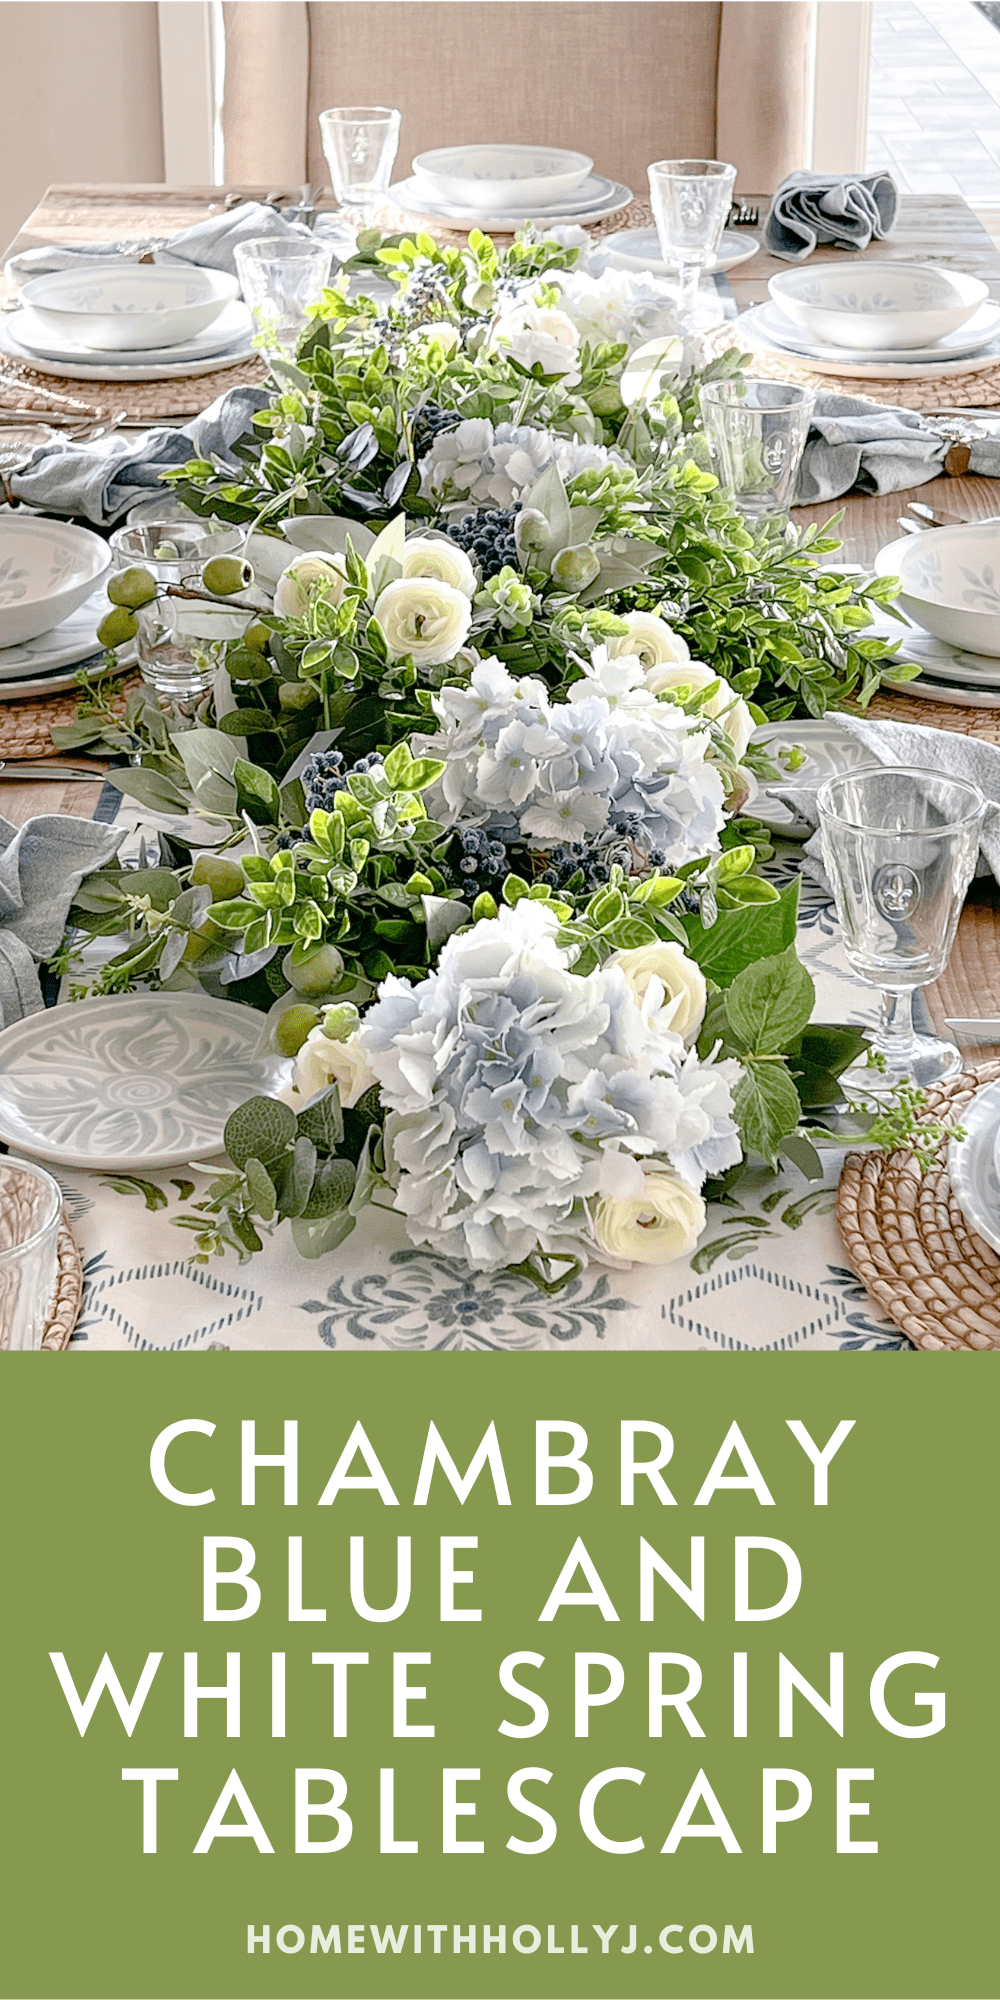 Design a fresh, bright, and inviting spring tablescape with chambray blue and white decor. Get inspired to create your own now.